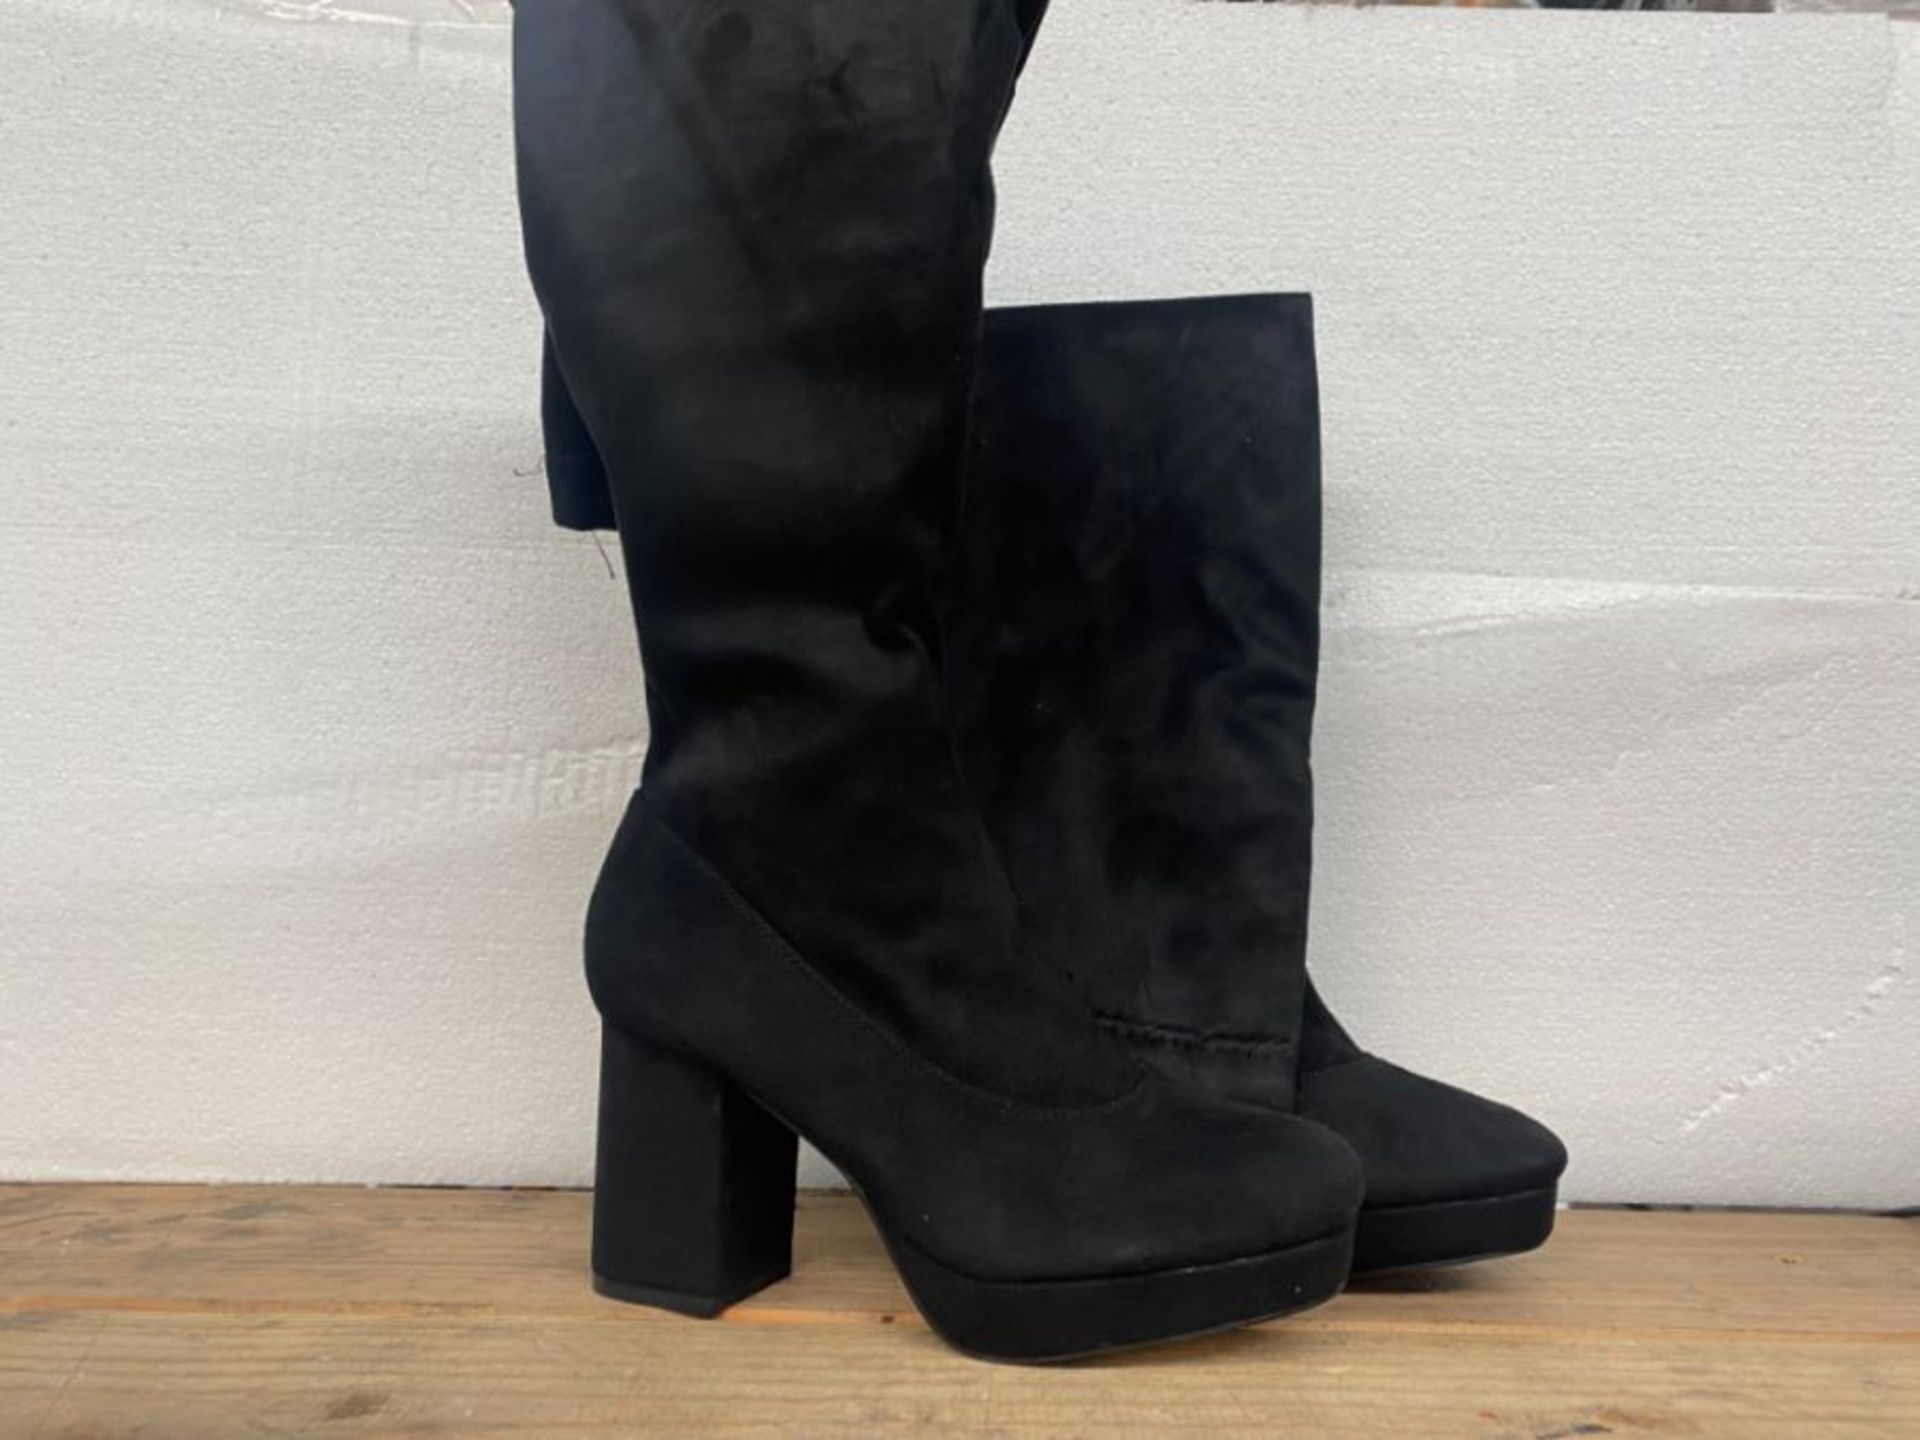 1 LOT TO CONTAIN AN AS NEW BOXED PAIR OF TRUFFLE COLLECTION UK SIZE 4 KNEE HIGH HEELED BOOT IN BLACK